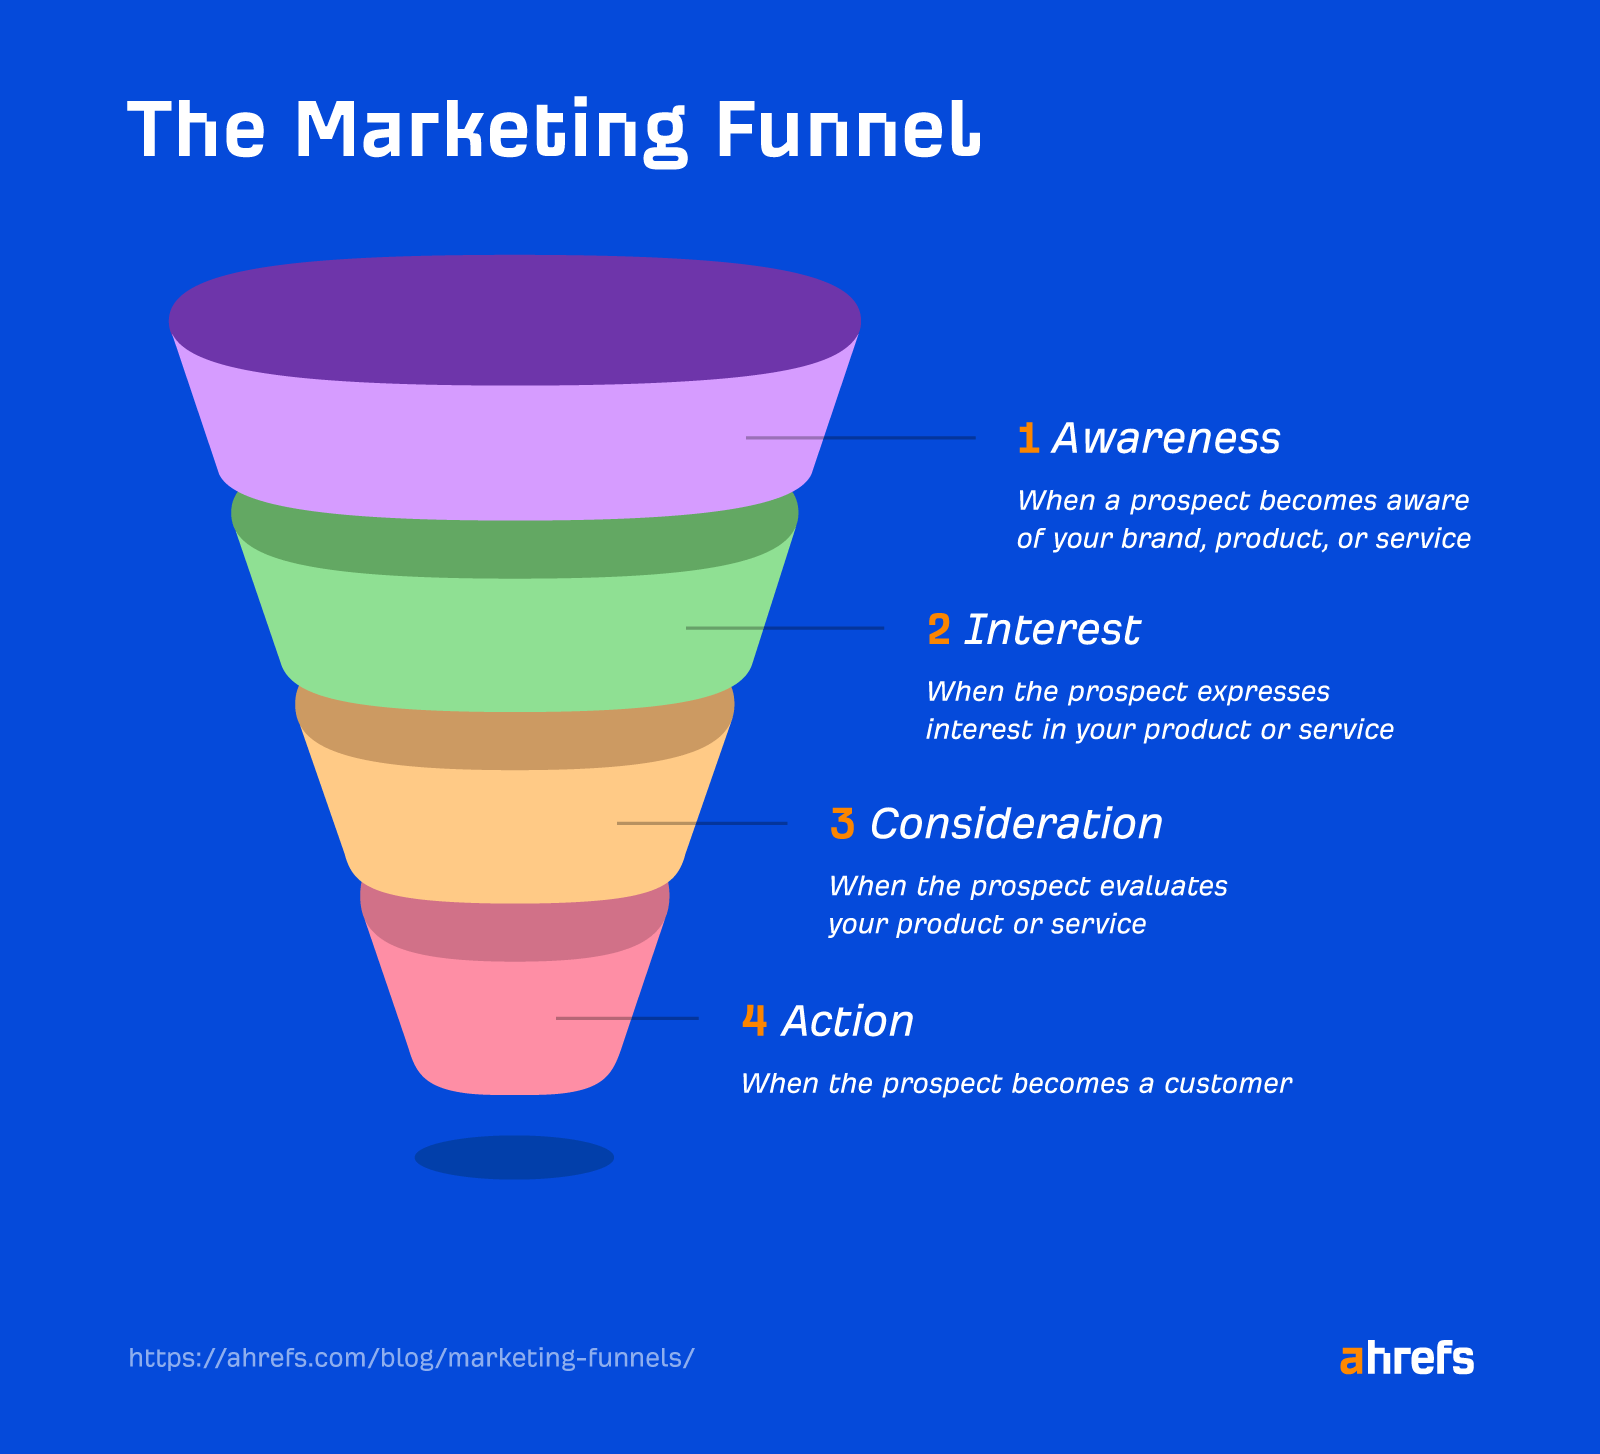 How the marketing funnel works